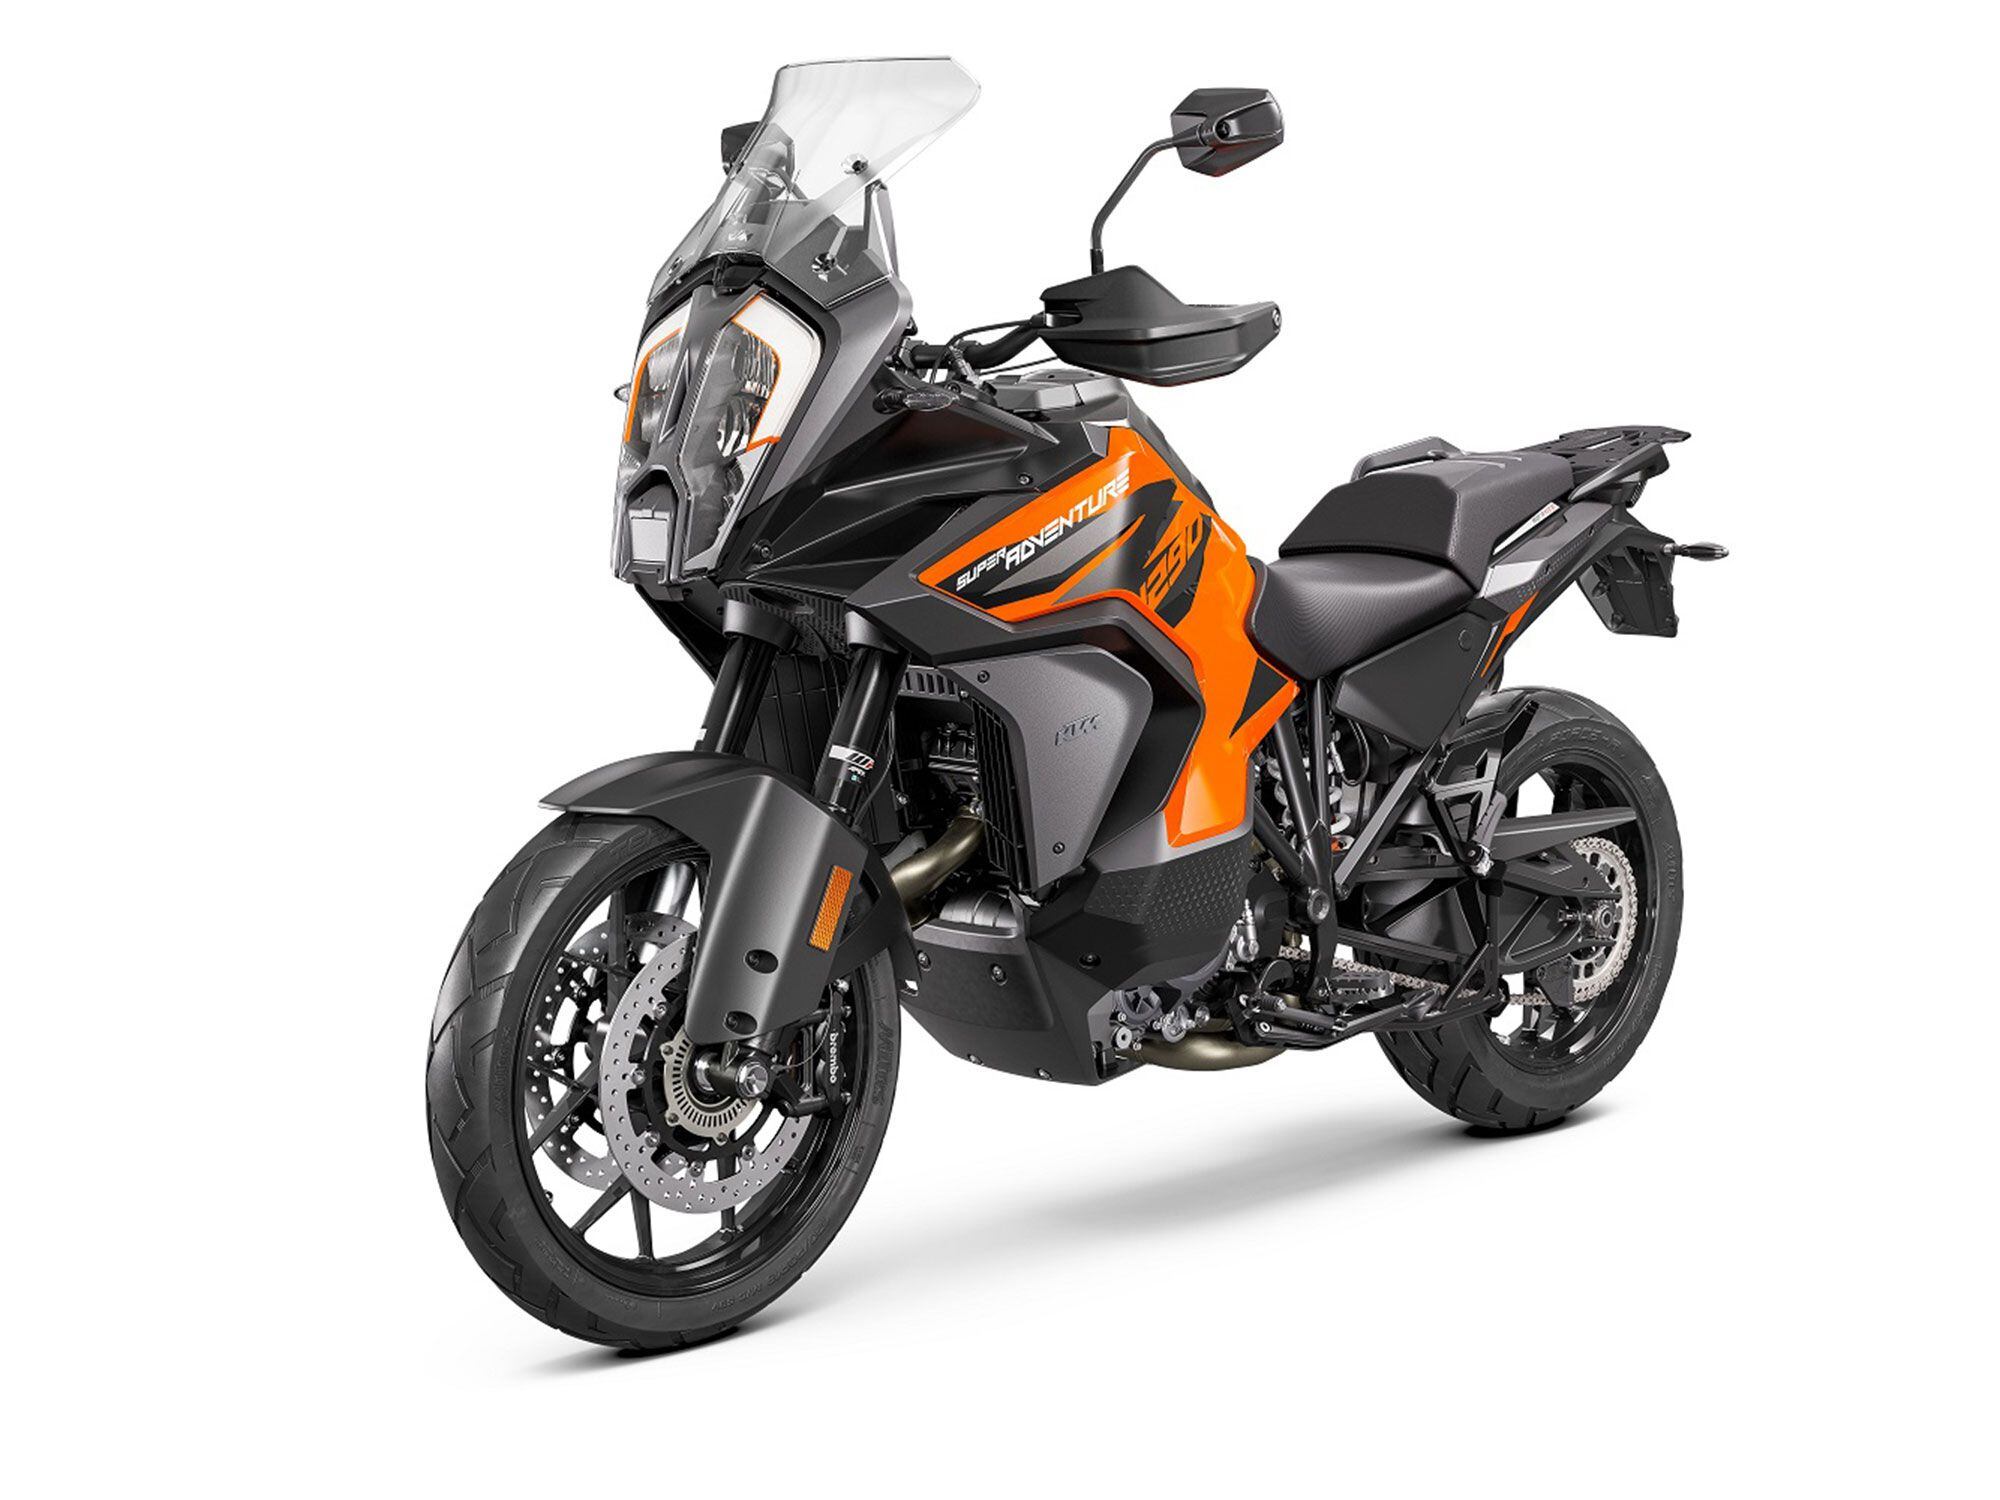 KTM’s third entry in the 1290 Super Adventure range will share the physical dimensions as the previously announced 1290 S model (shown).